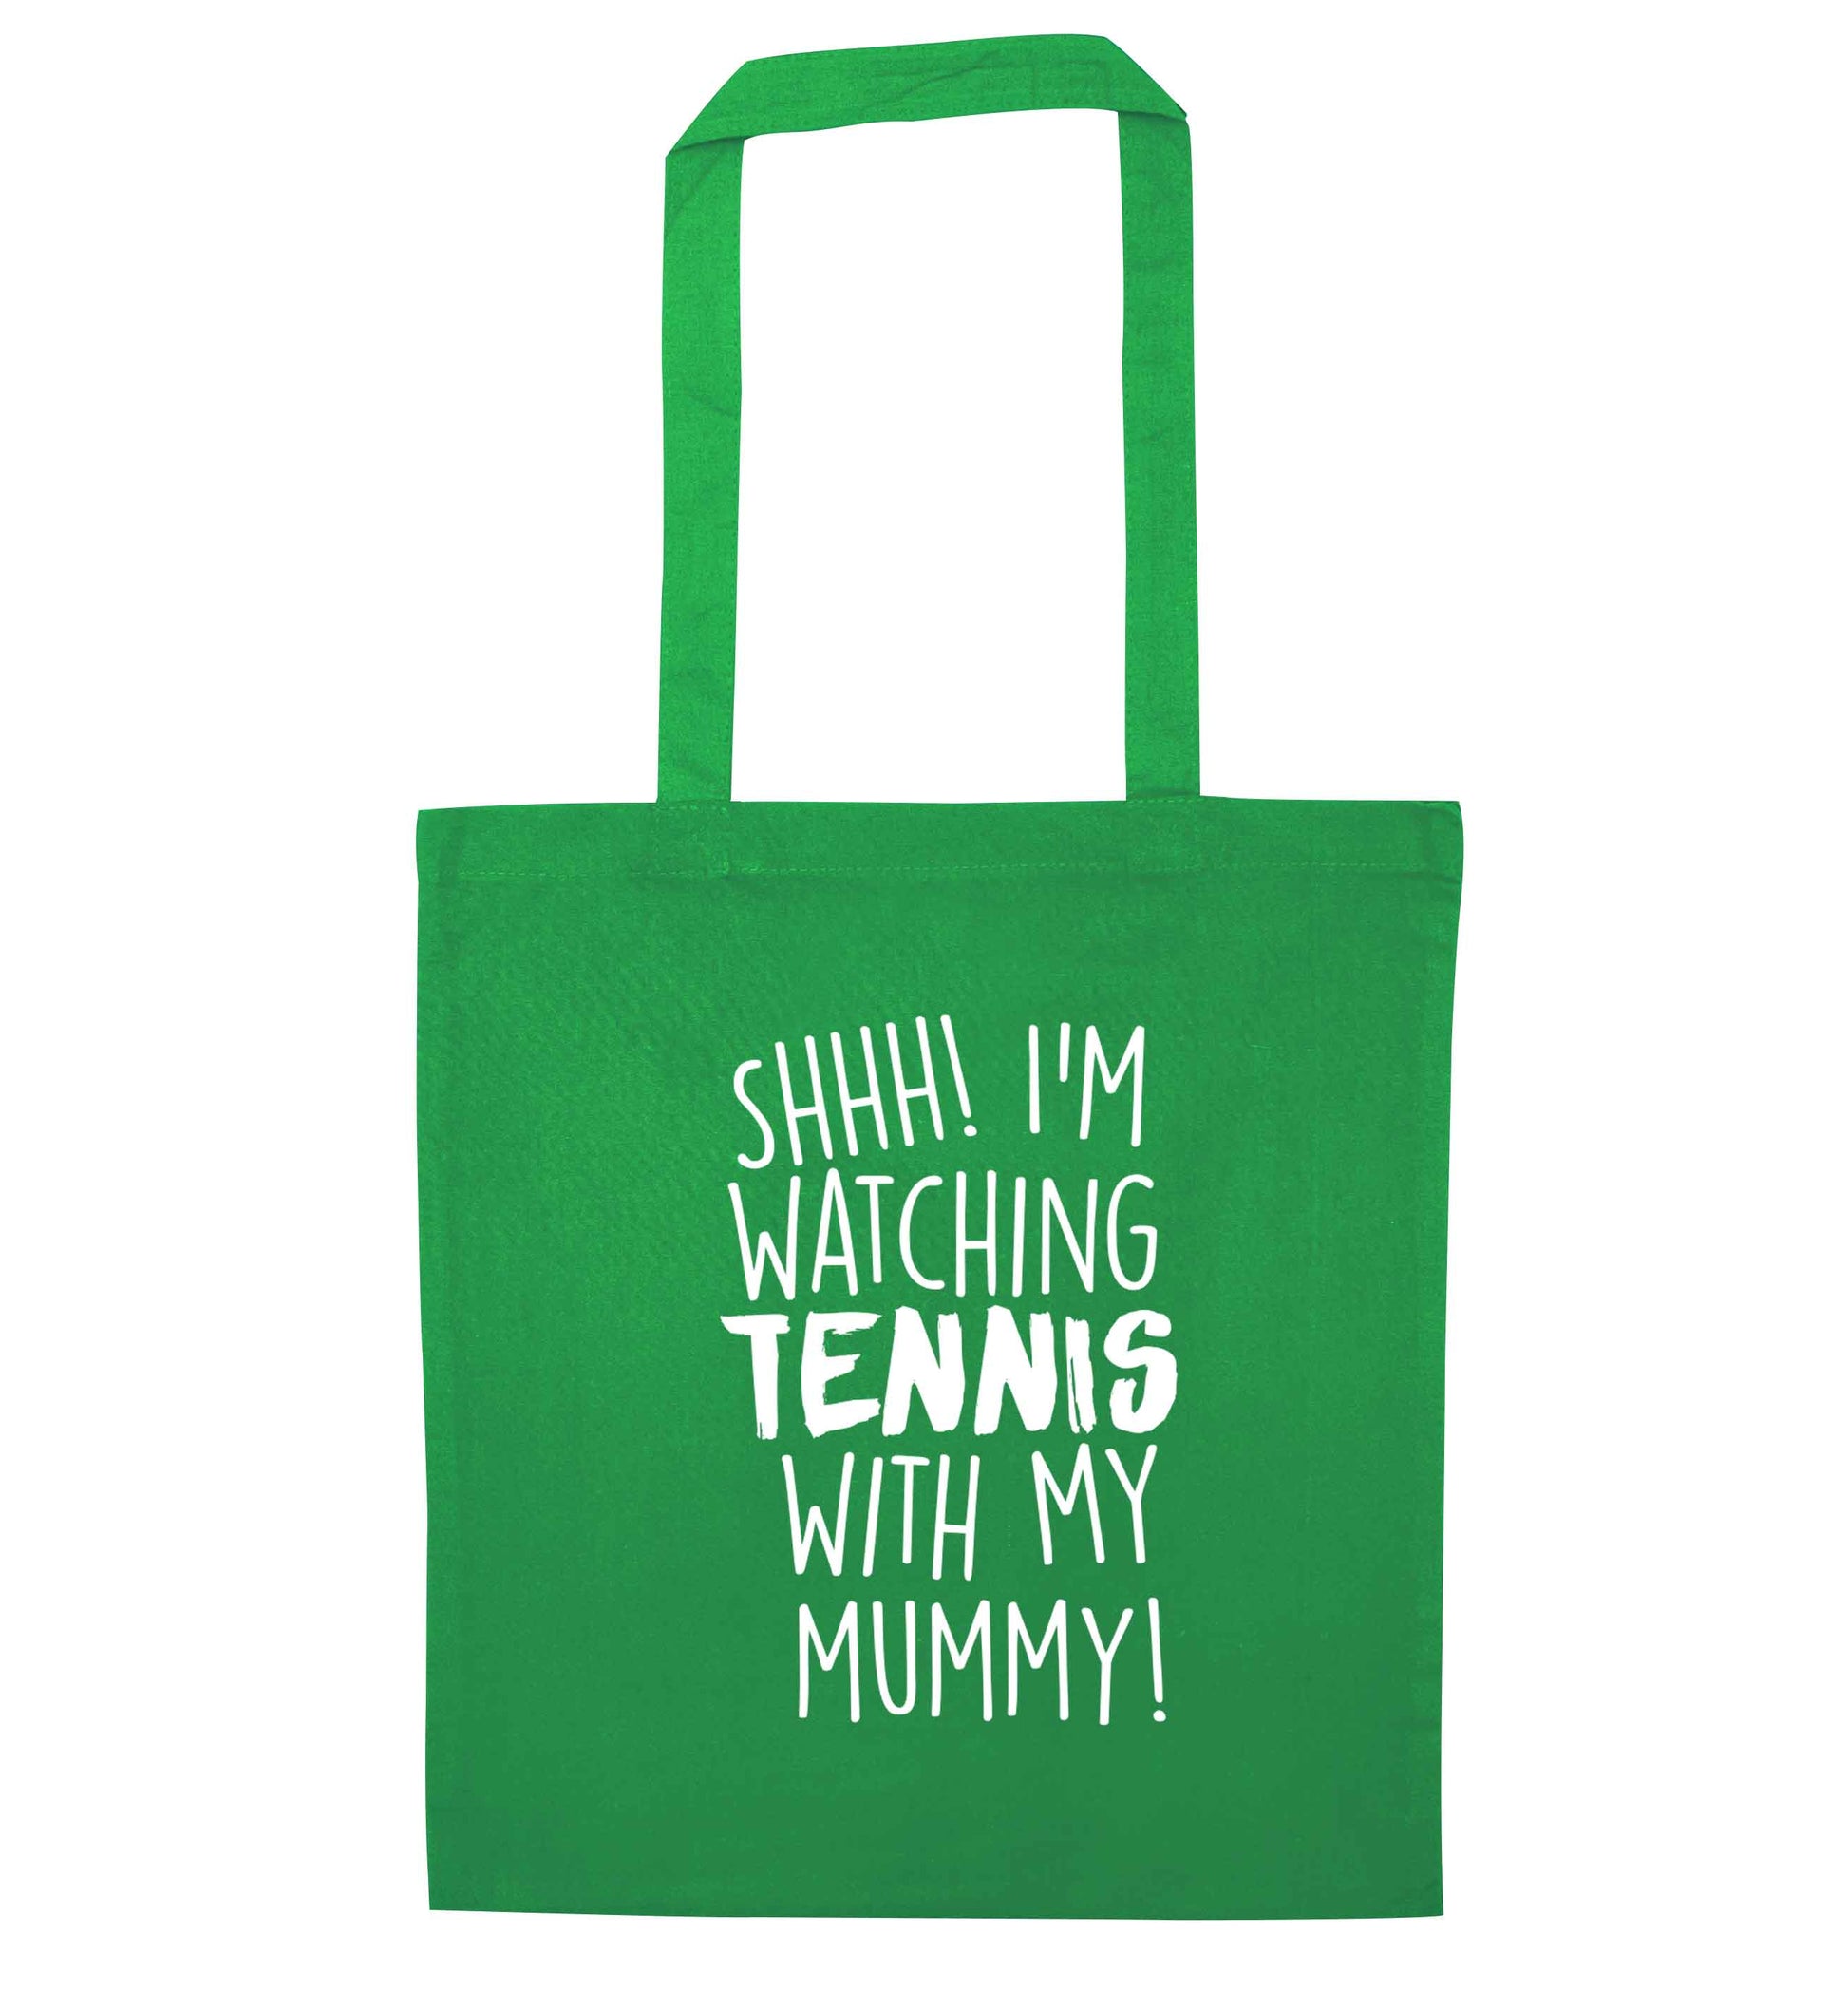 Shh! I'm watching tennis with my mummy! green tote bag